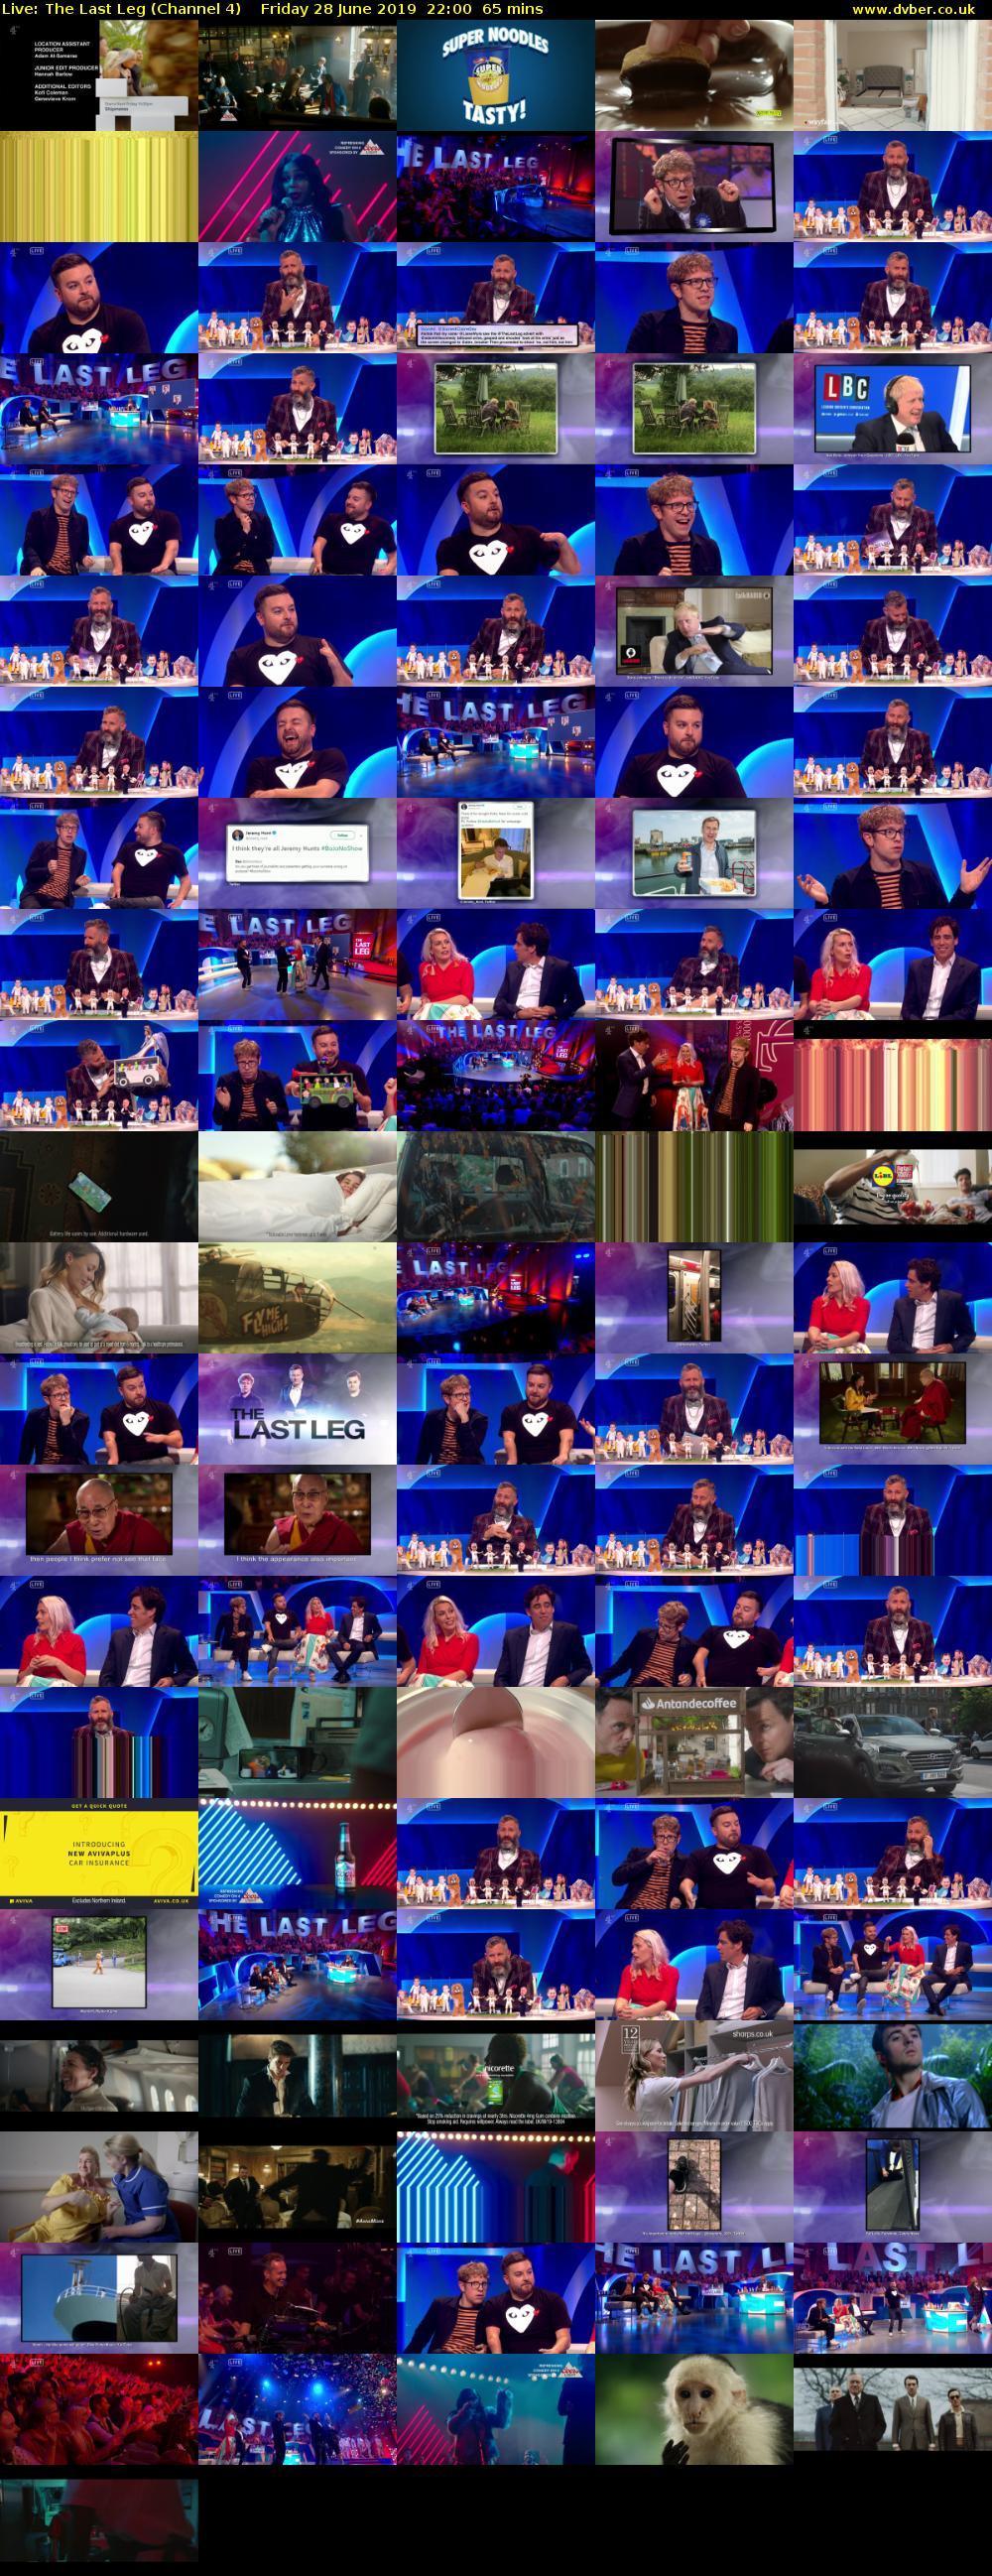 Live: The Last Leg (Channel 4) Friday 28 June 2019 22:00 - 23:05